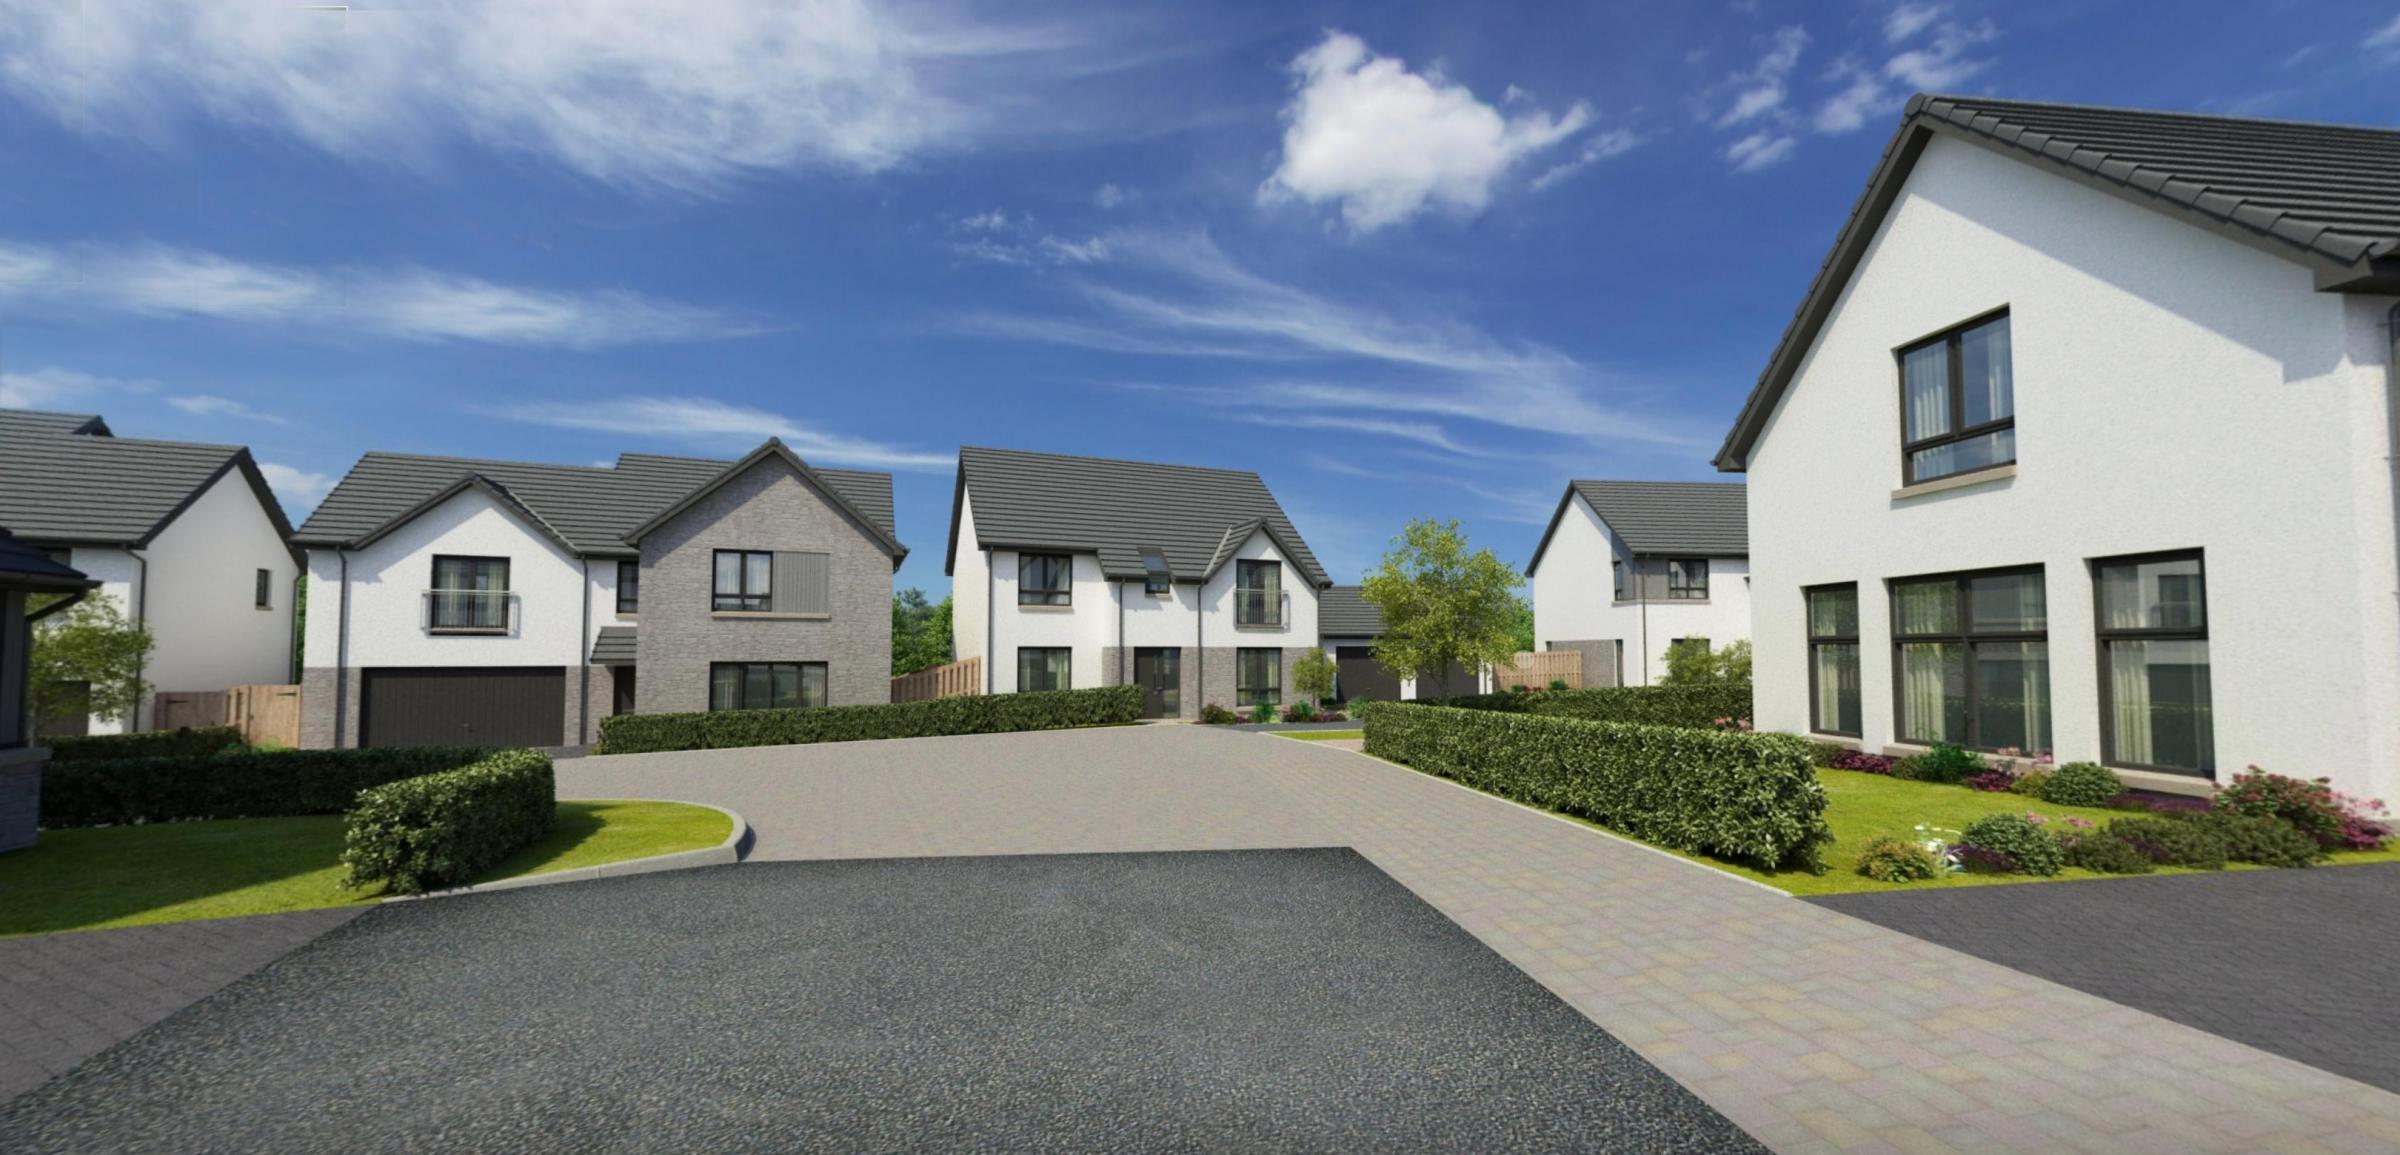 HOMES: A render of the development at Pool of Muckhart